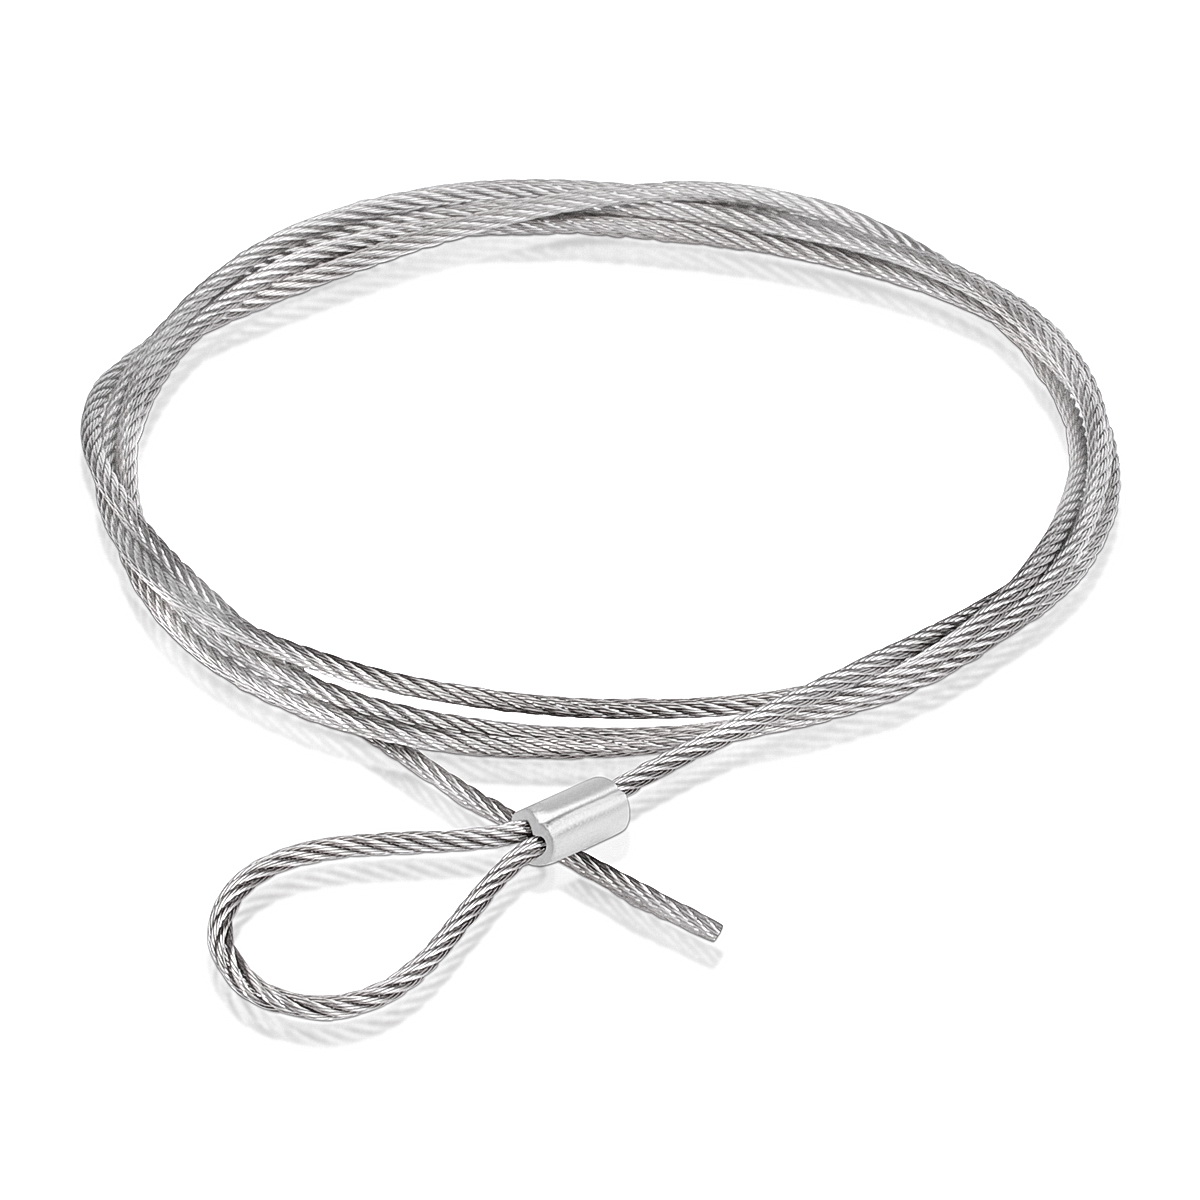 Looped Stainless Steel Cable - 48''